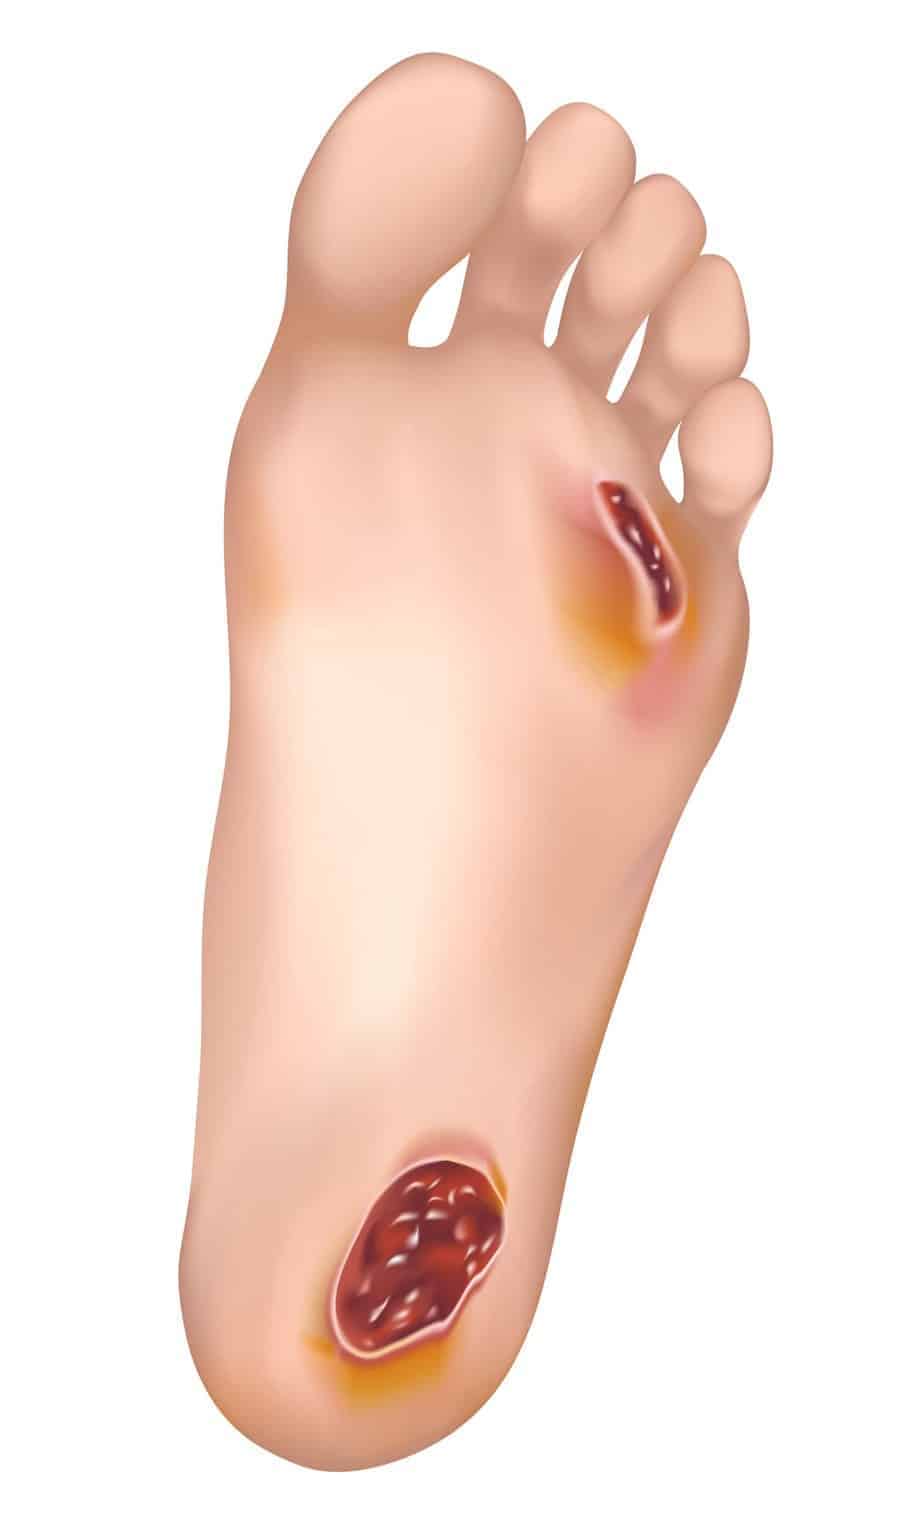 Diabetic foot ulcer picture